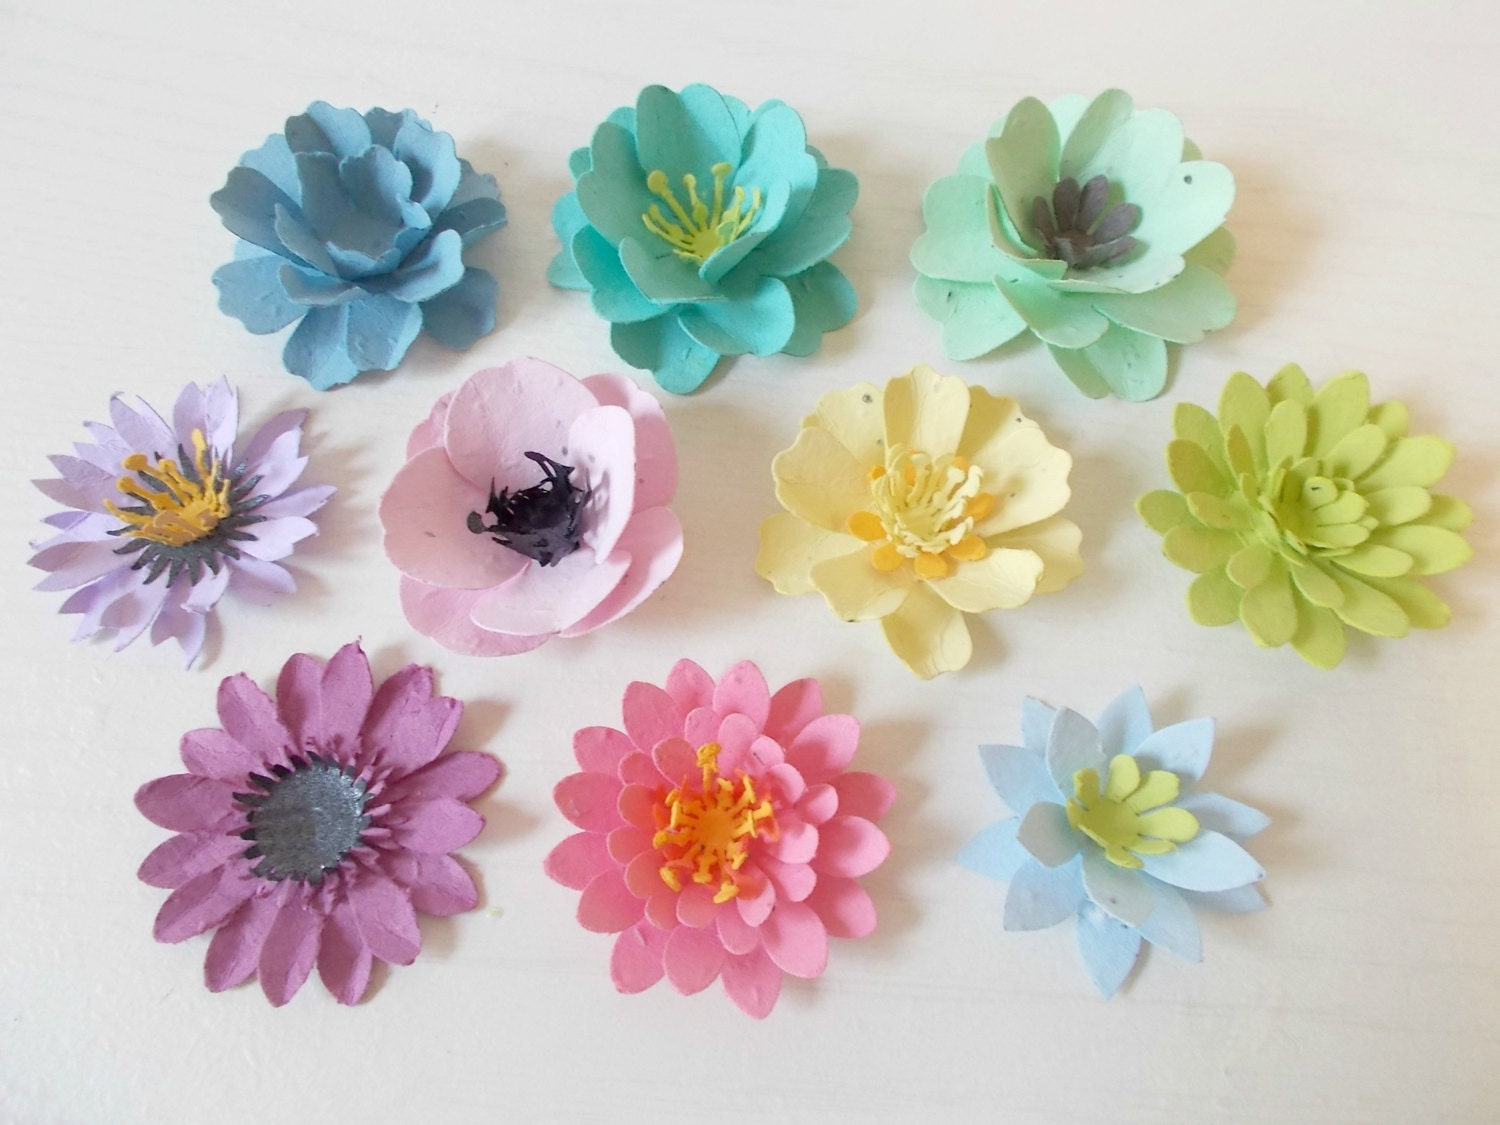 Plantable Paper Flowers Sample Pack - Mix of 10 Flowers - Unique Hostess Gift - Eco Friendly Wedding Favors - Plant and Grow!